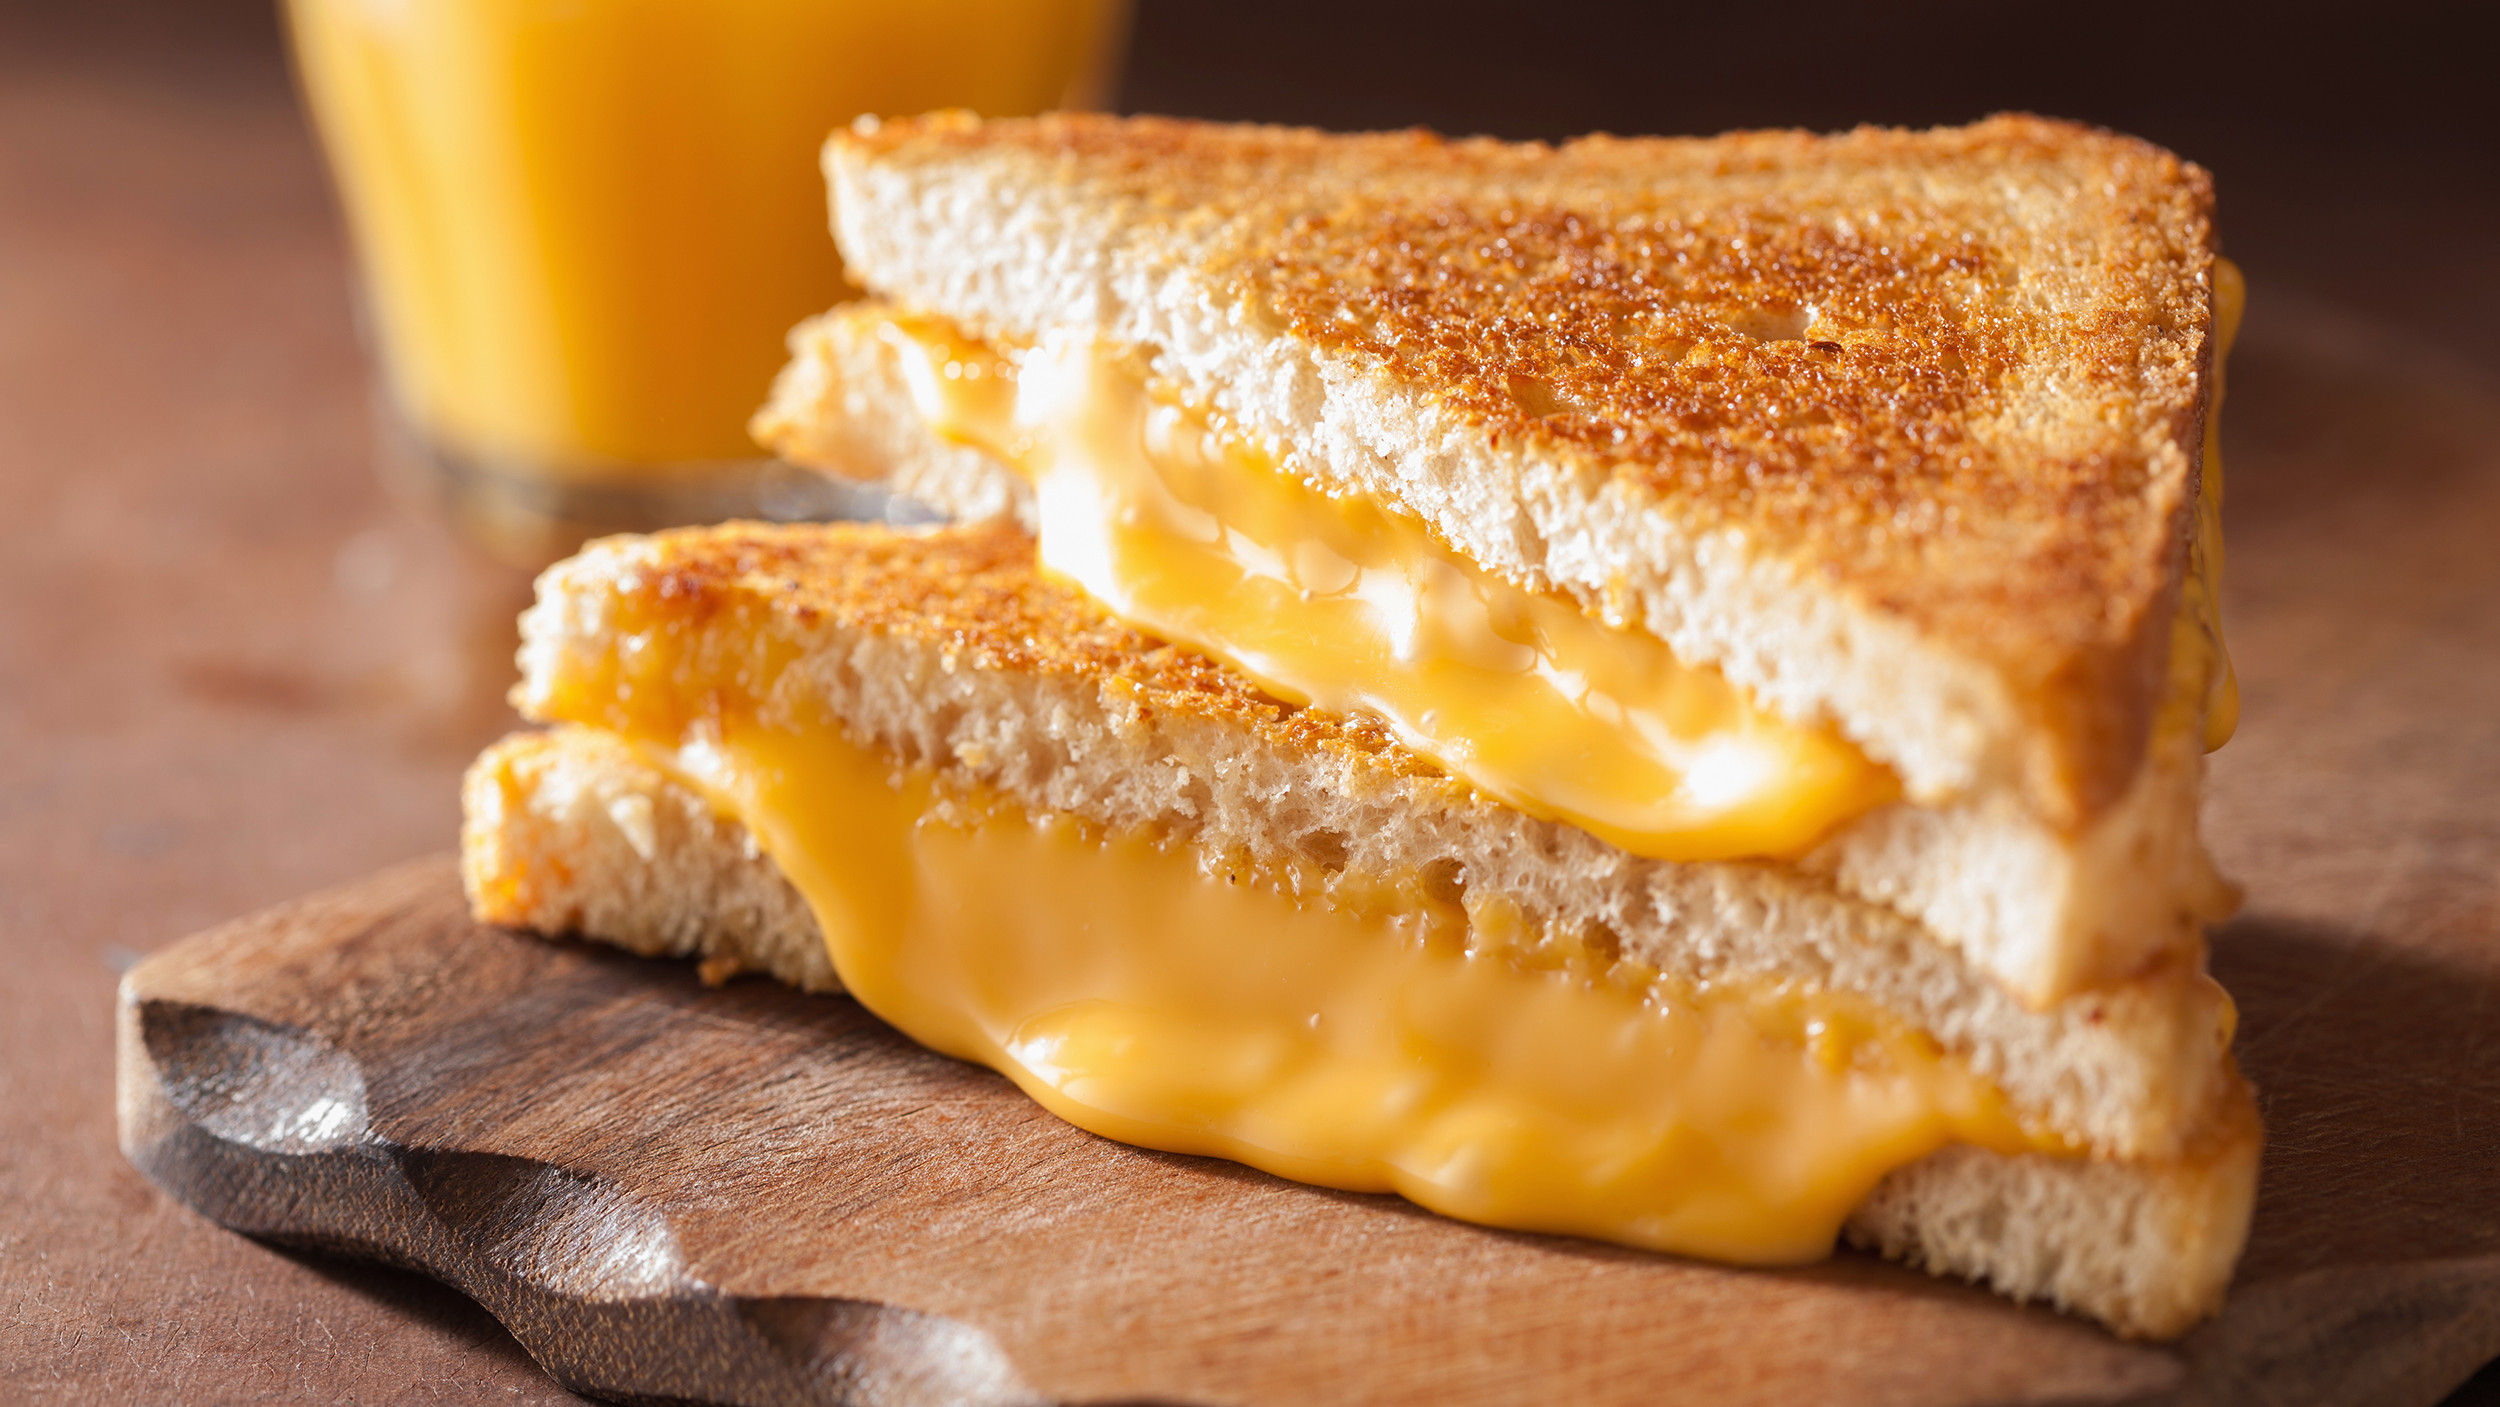 Grilled Cheese Sandwiches
 8 tips for making the perfect grilled cheese sandwich